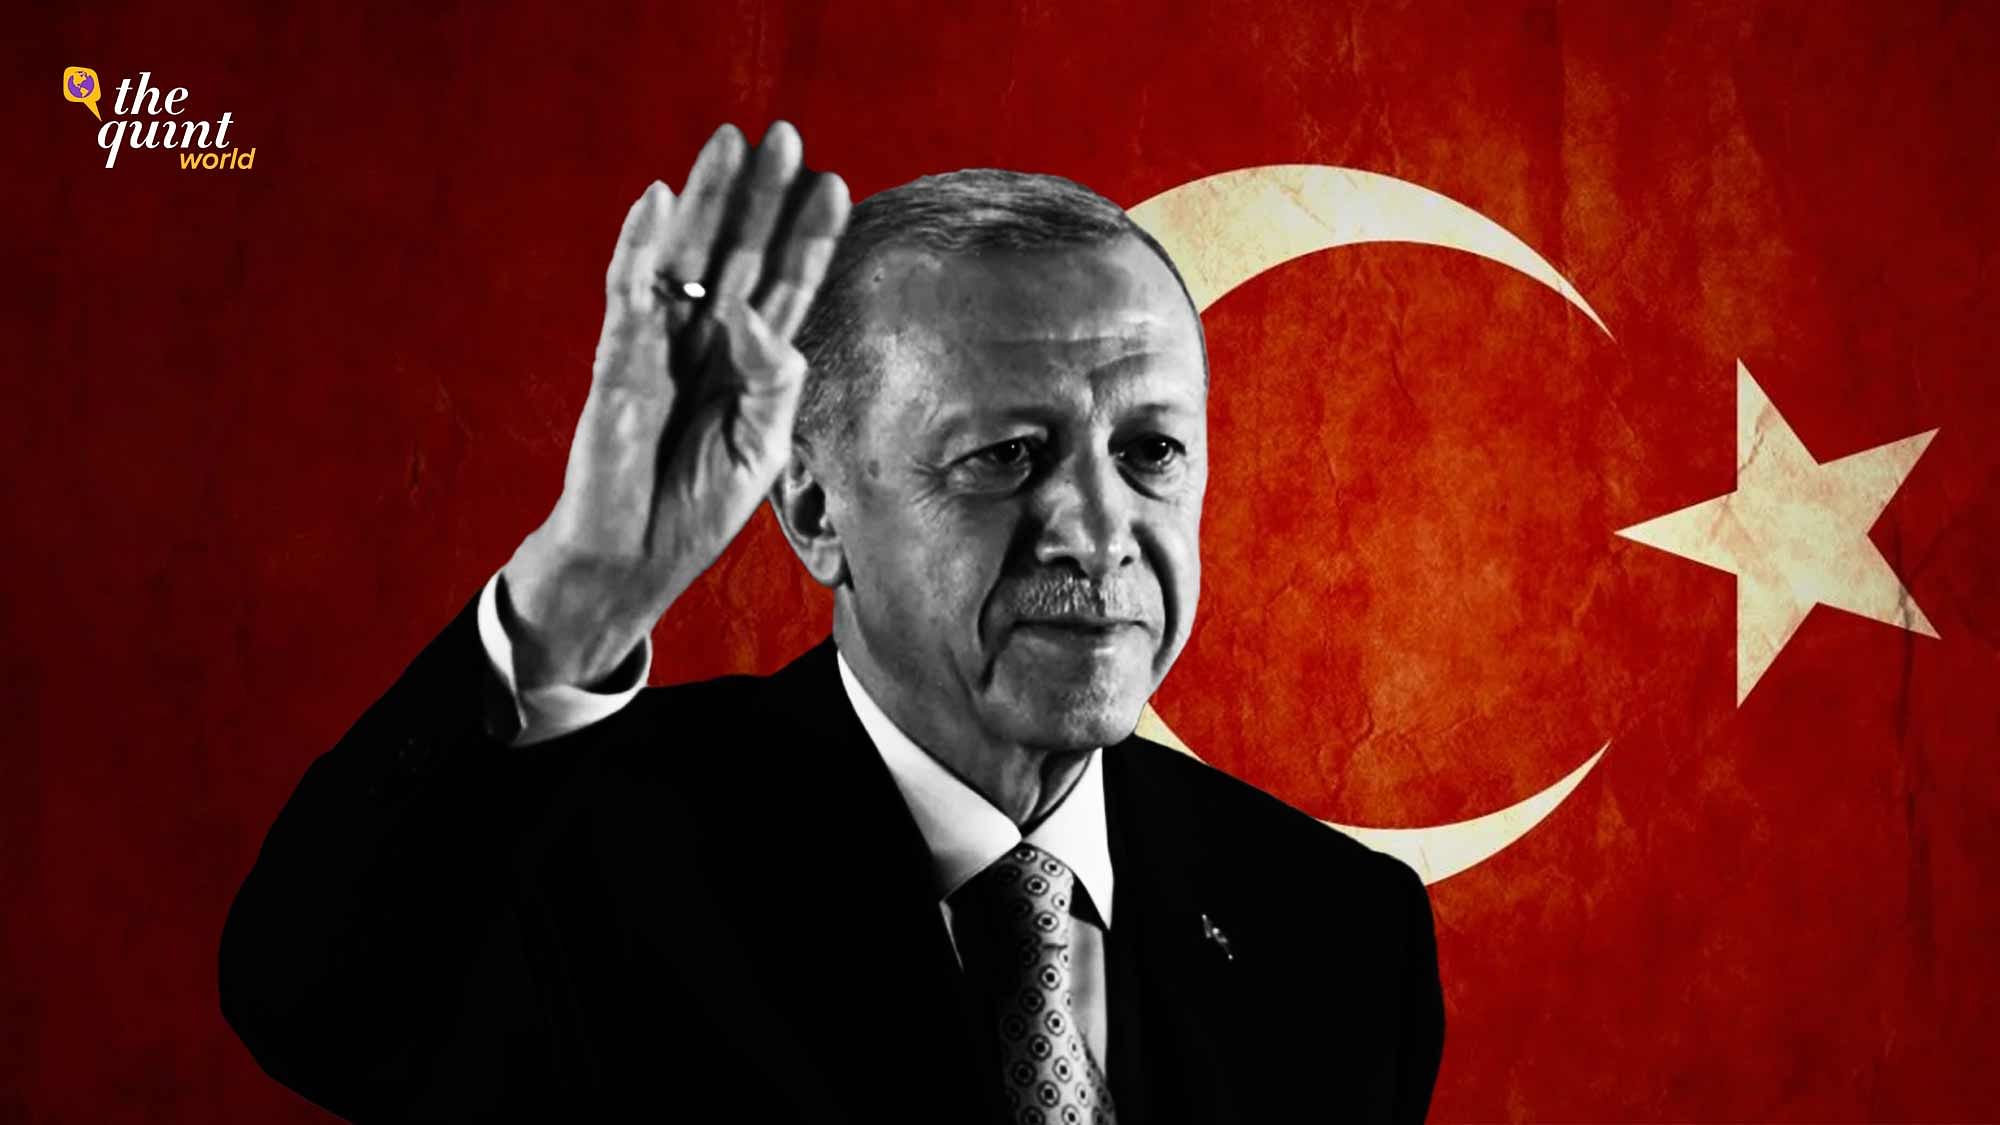 <div class="paragraphs"><p>Recep Tayyib Erdogan will remain president of Turkey for another five years after winning Sunday’s run-off election over his long-time rival, Kemal Kilicdaroglu. If he serves the full five-year term, he will have held power for 26 years – almost the entire history of Turkey in the 21st century.</p></div>